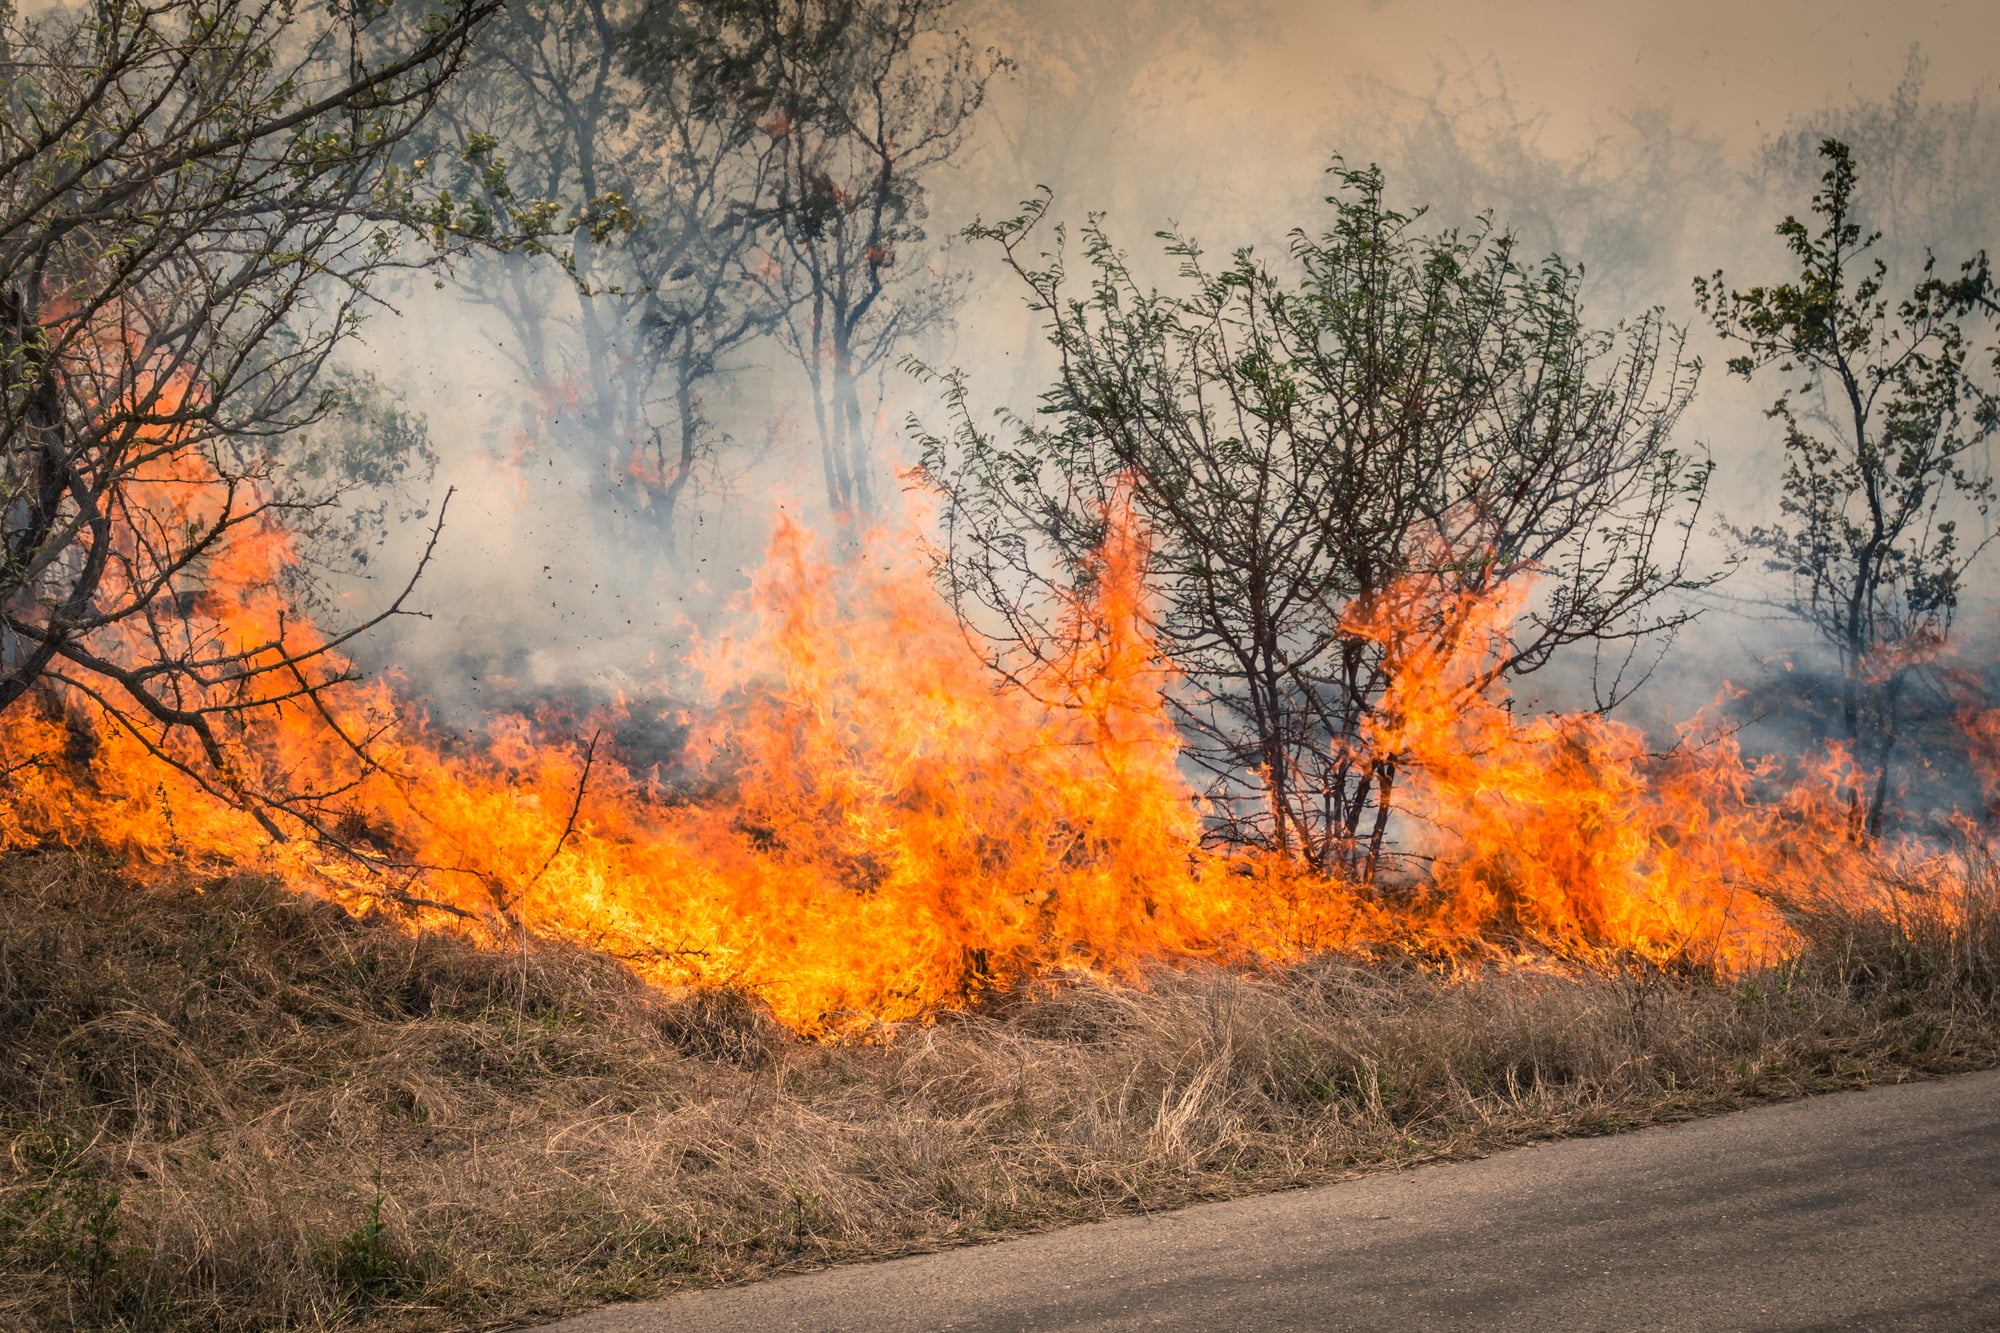 Are you buying your new home near bushland in Brisbane? Find out what you need to know about a fire rated wall to protect your family from bushfire.